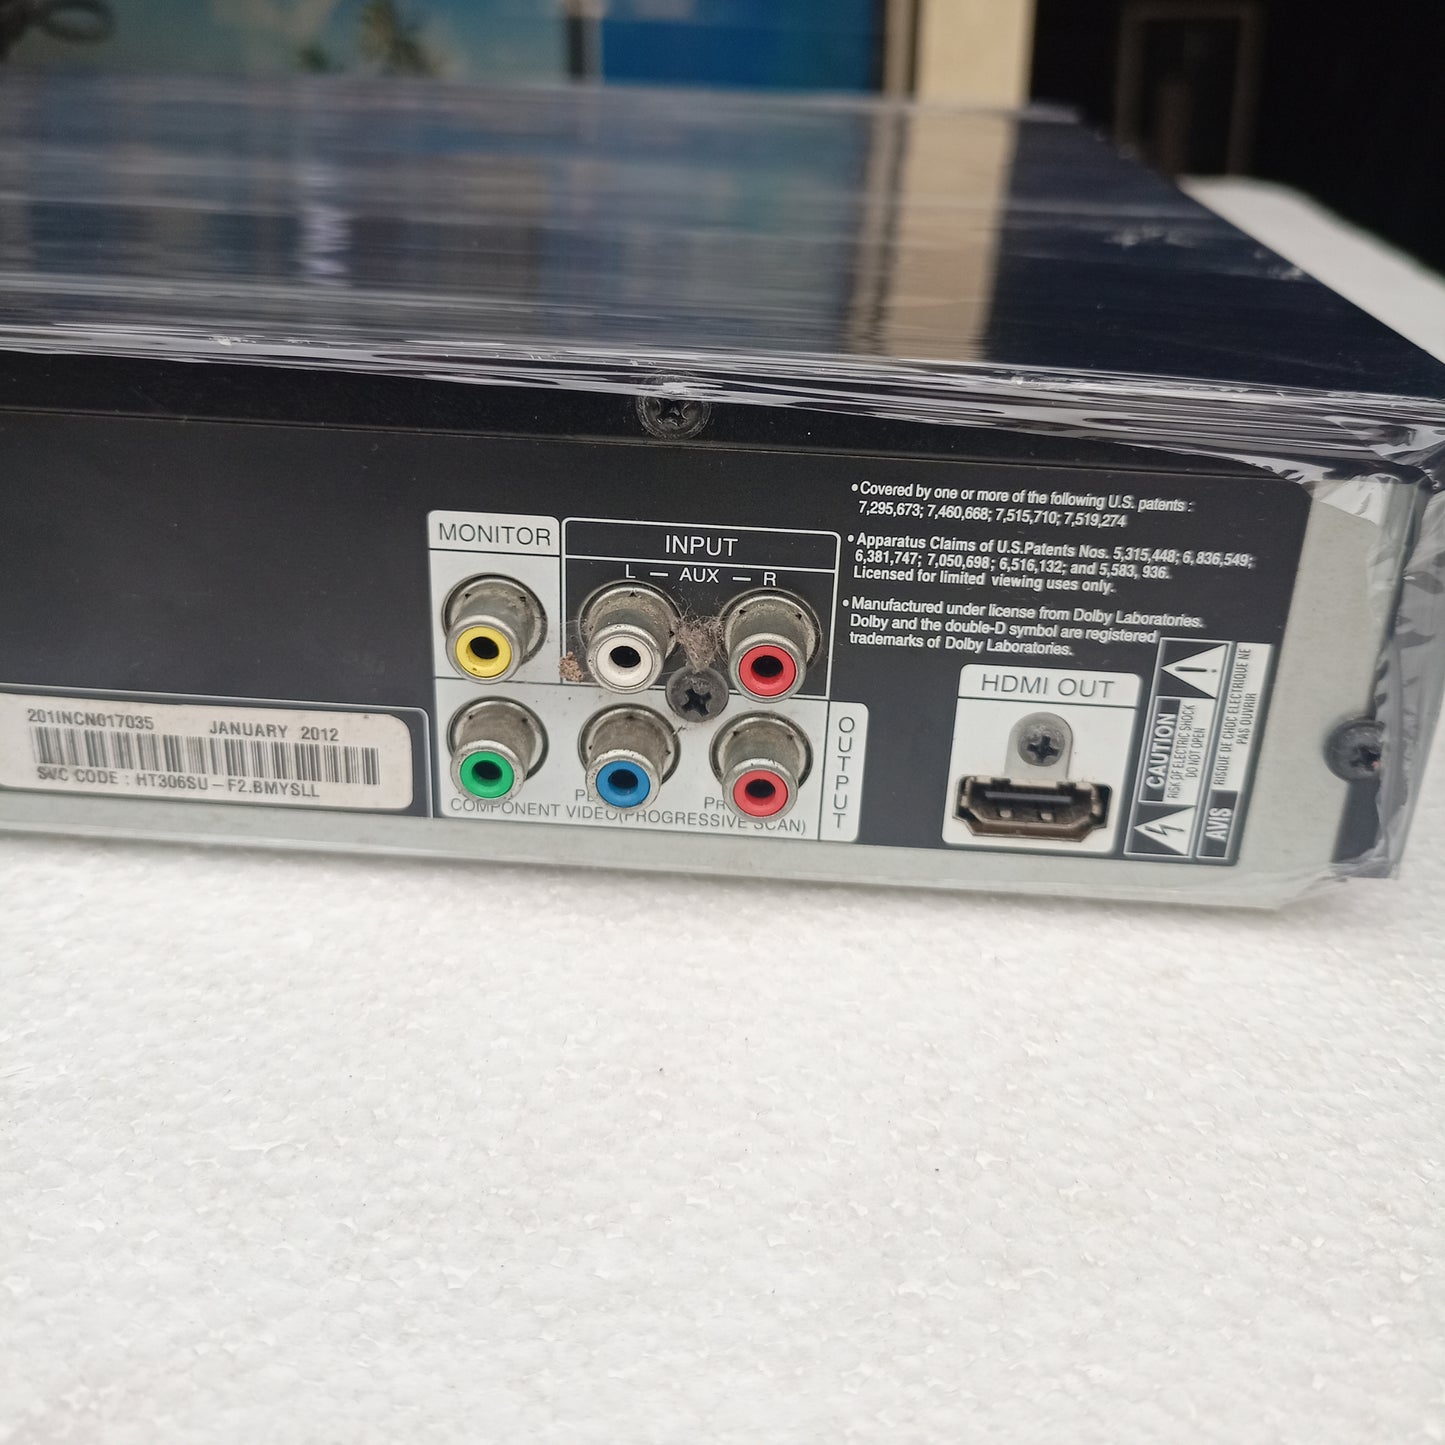 LG HT306 330Watts DVD Home Theater Machine Head - Video outputs view